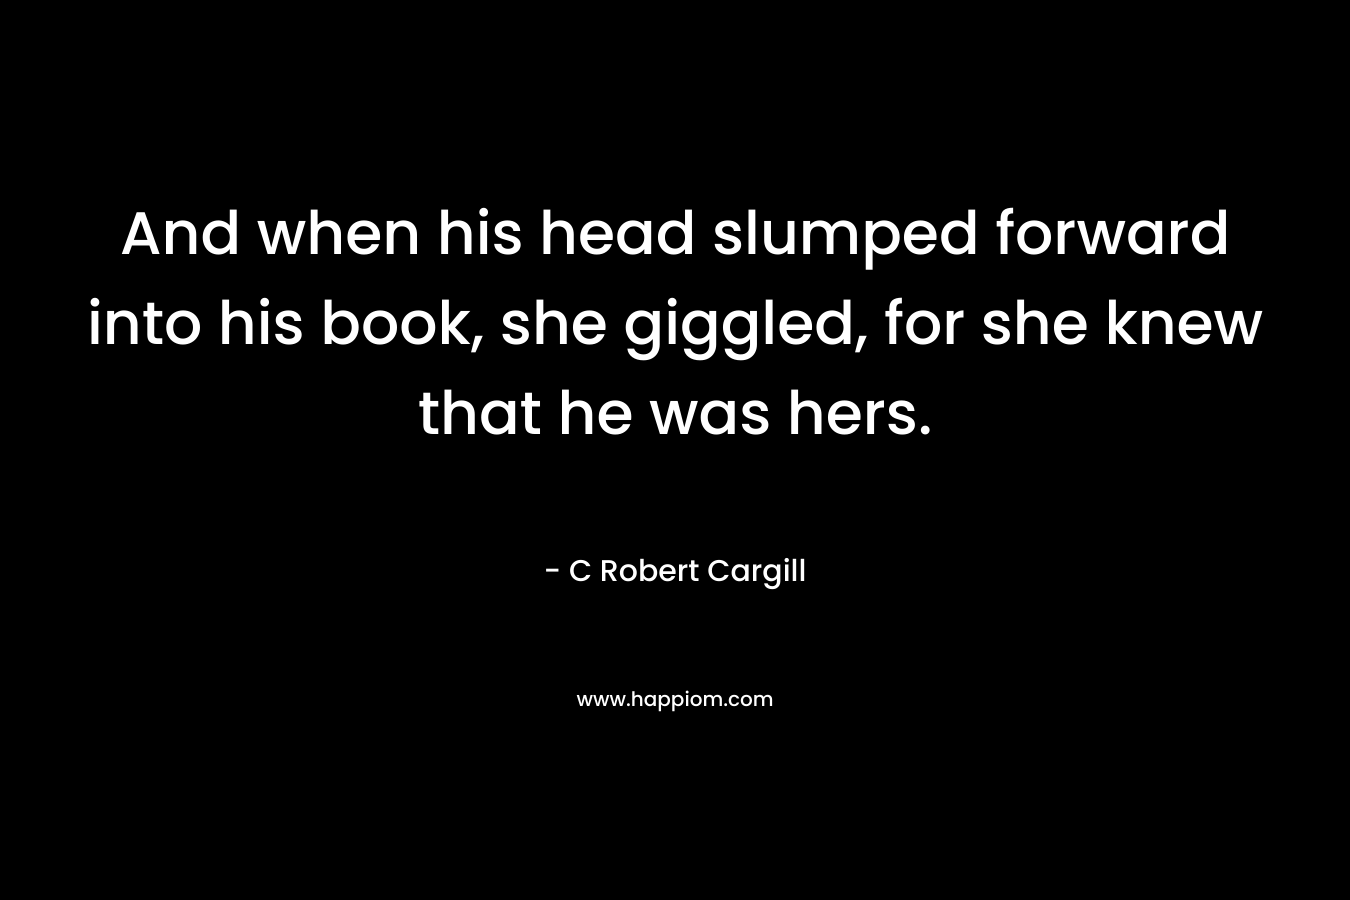 And when his head slumped forward into his book, she giggled, for she knew that he was hers. – C Robert Cargill